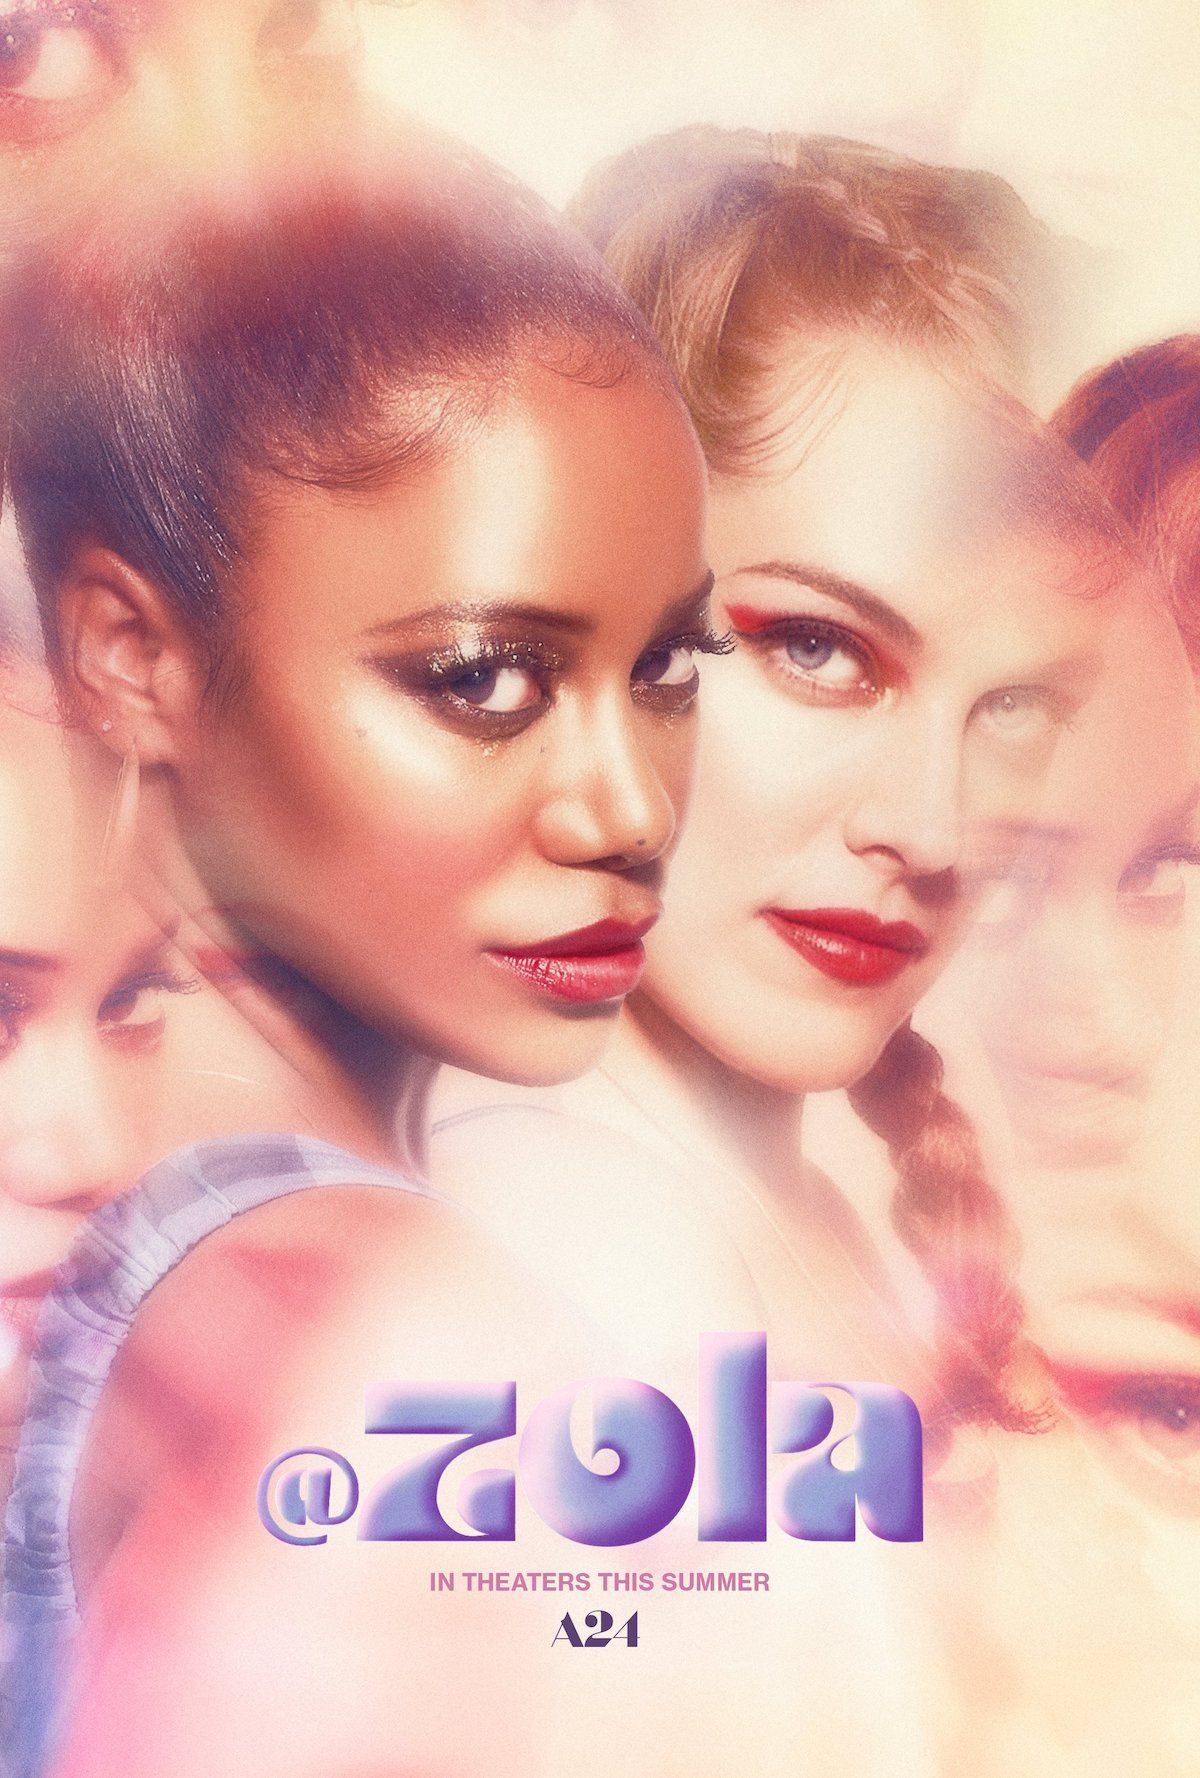 zola-poster